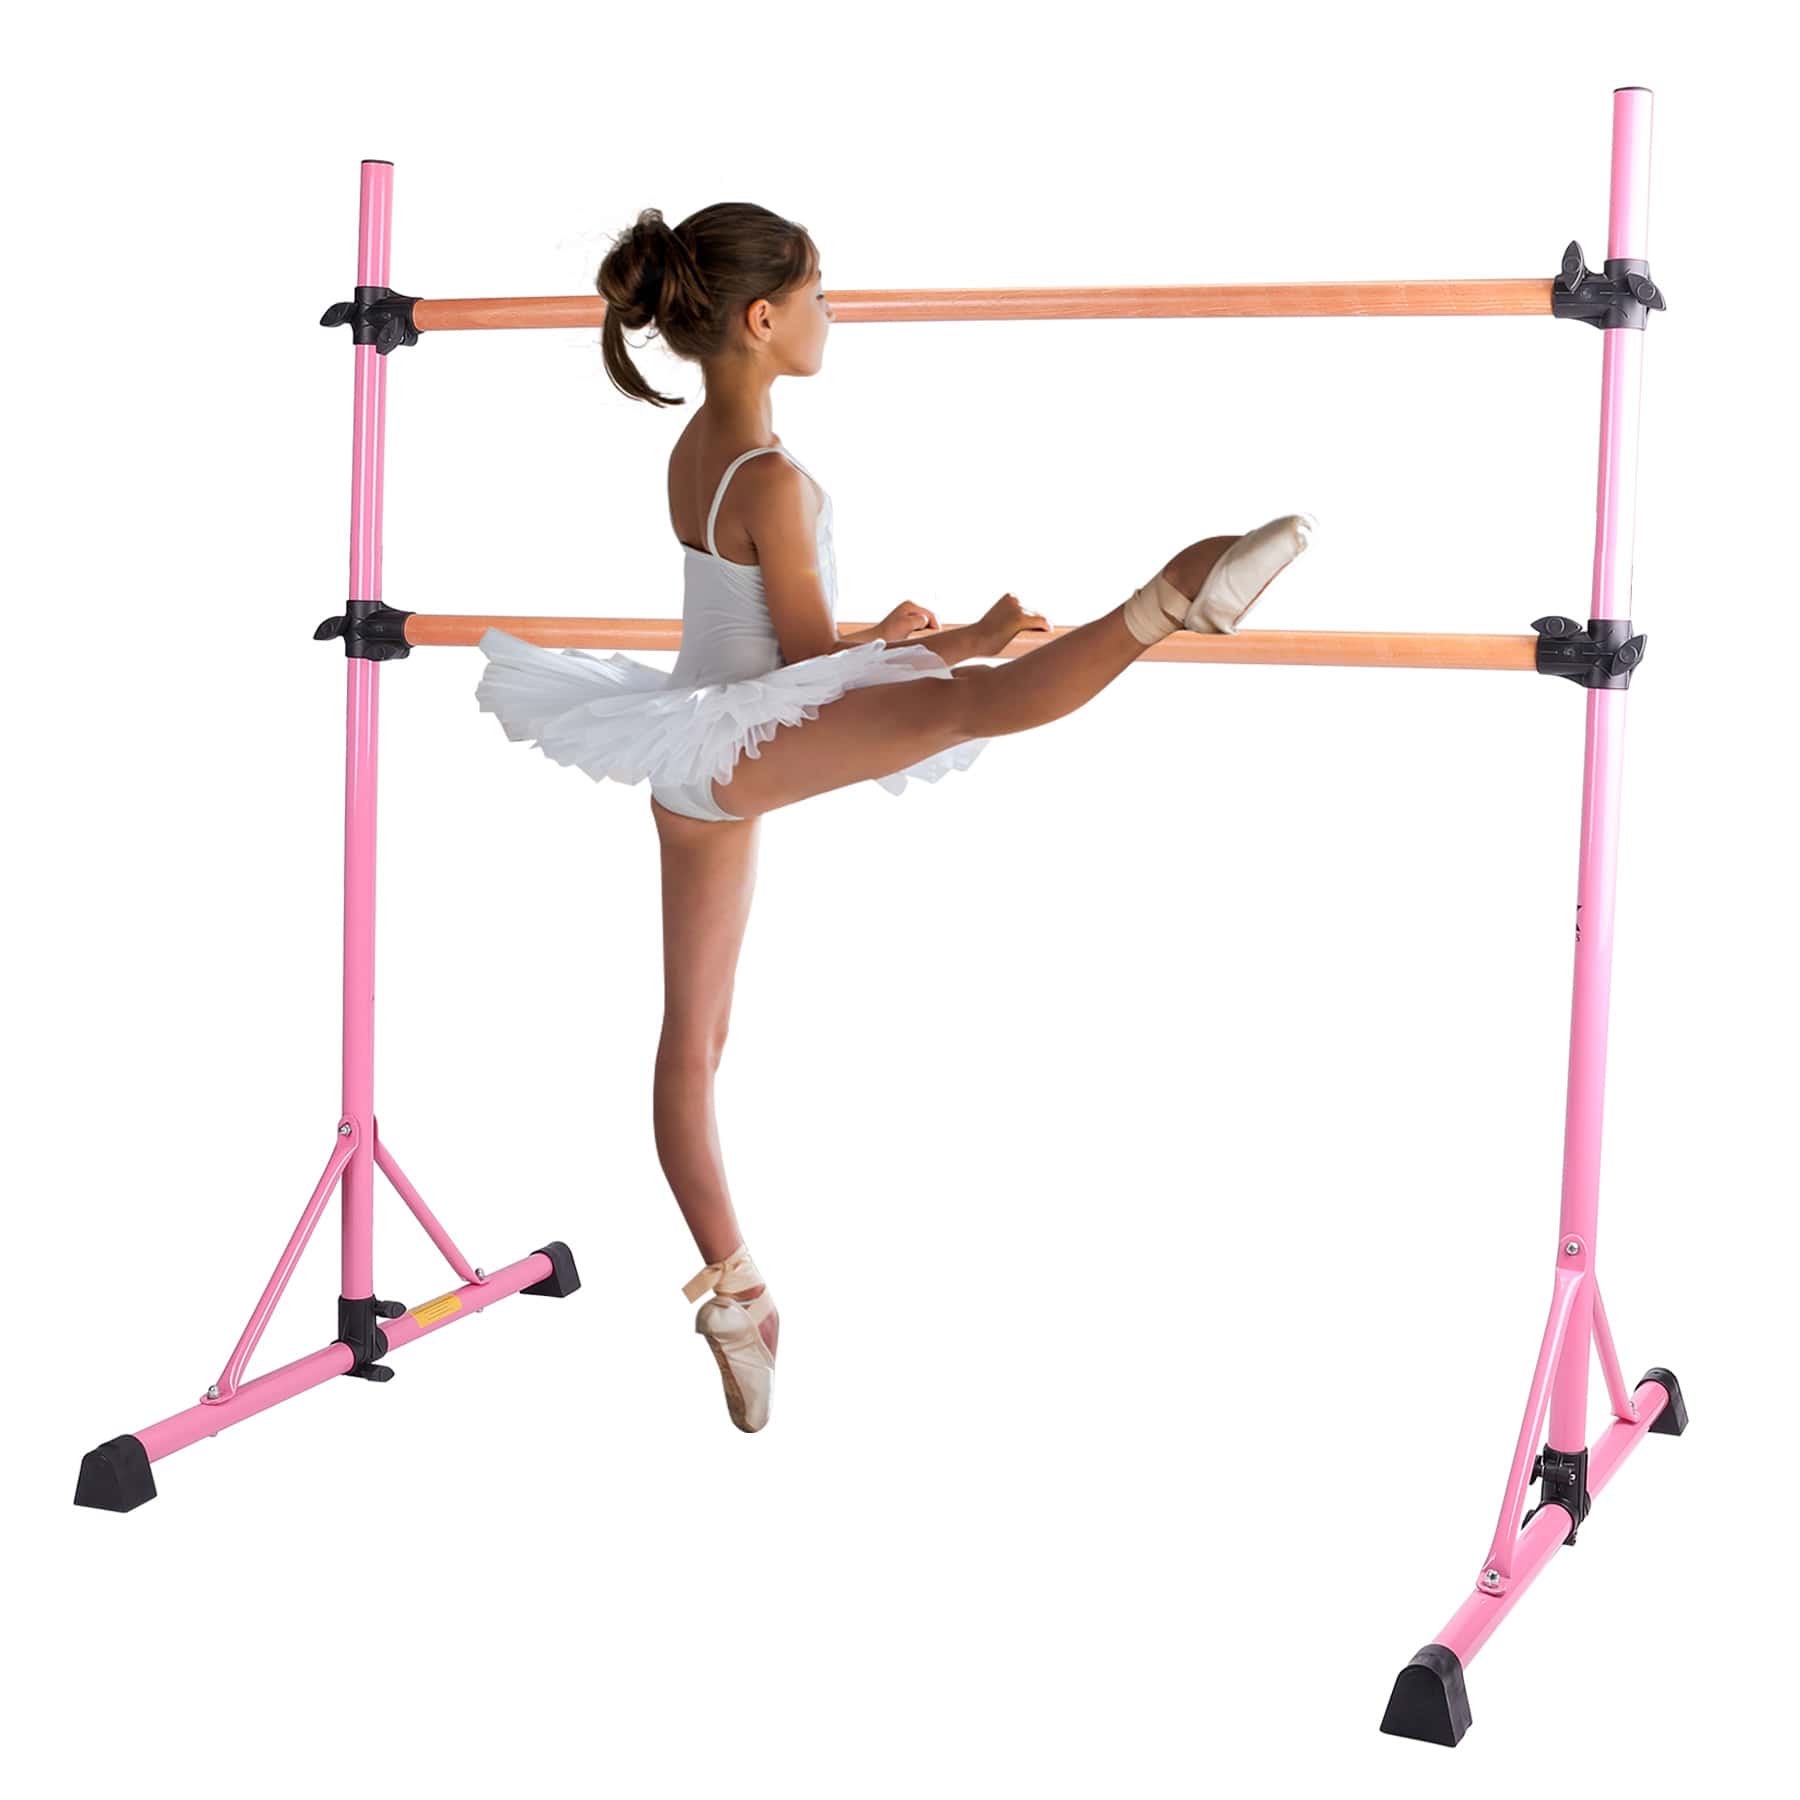 How to Make a Ballet Barre at Home  Home dance studio, Ballet barre, Ballet  barre for home